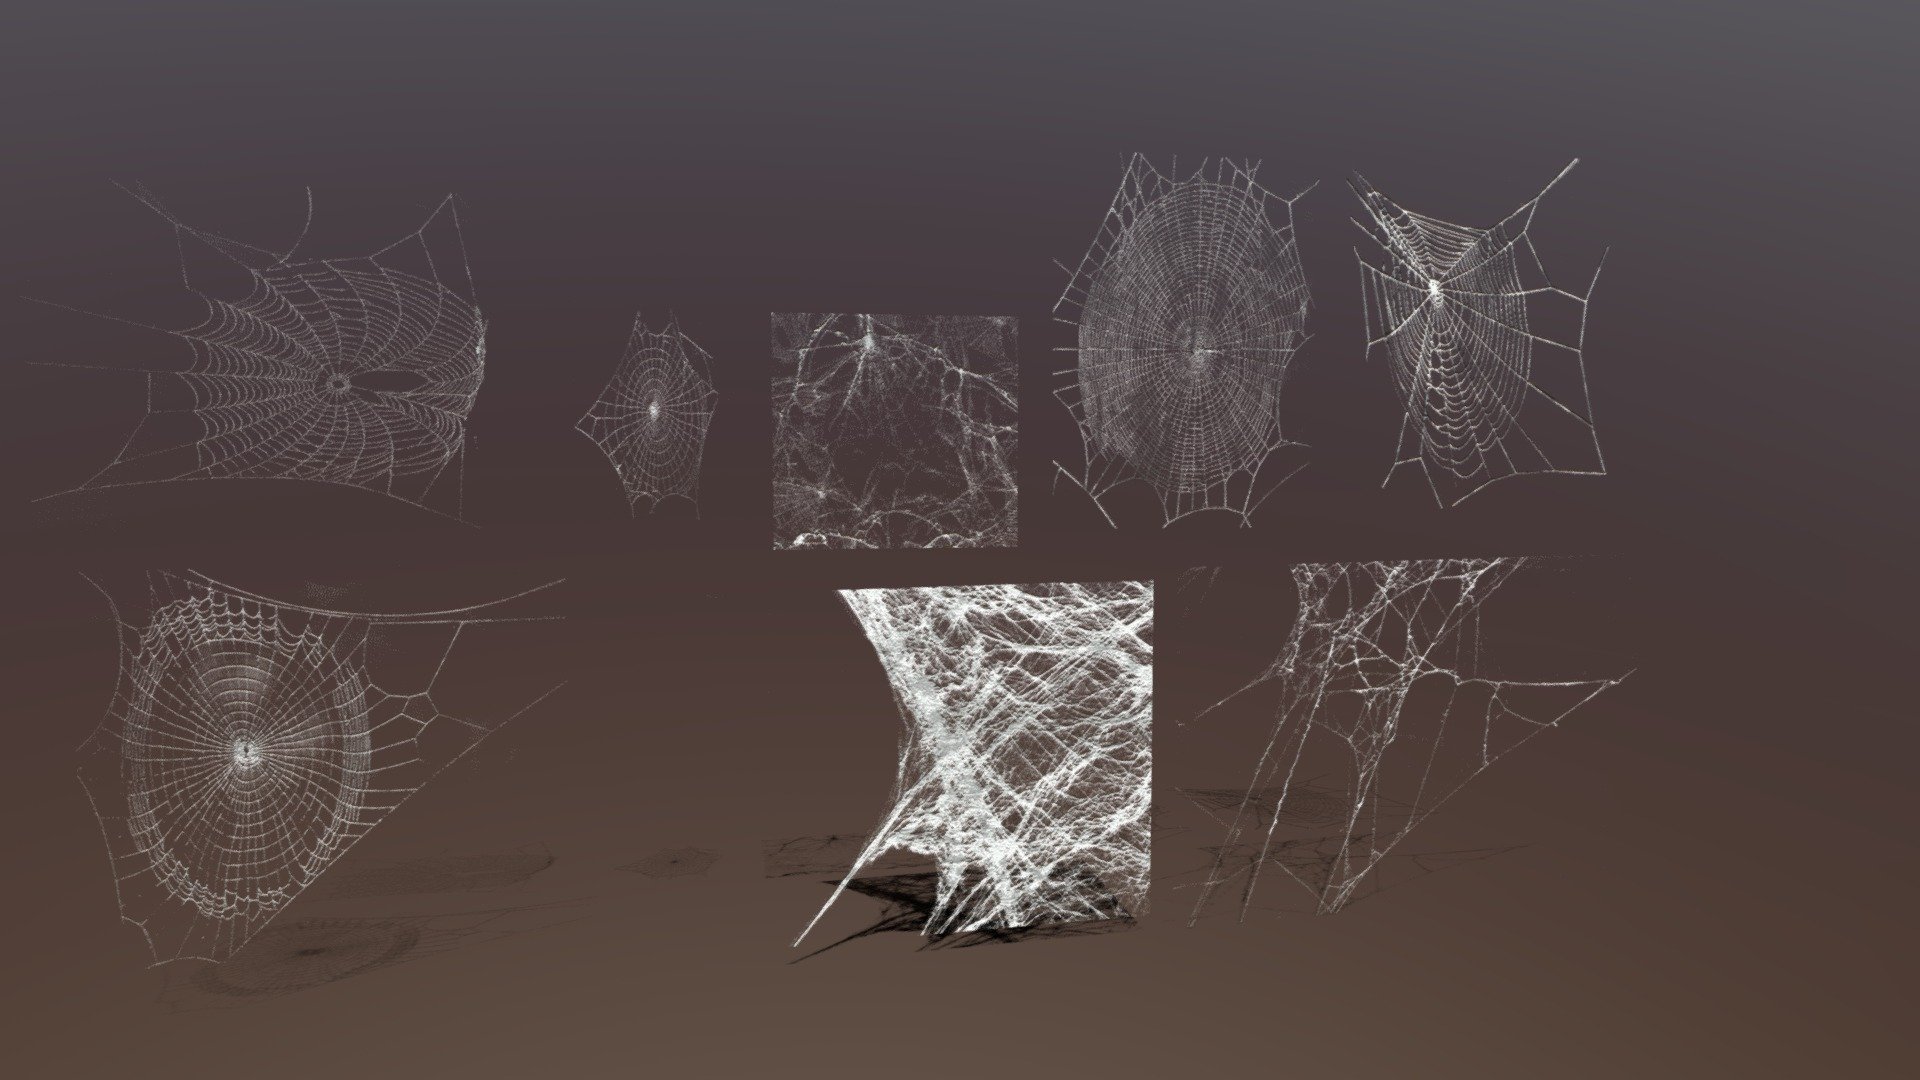 Spider Webs Pack 3D Model. This model contains the Spider Webs Pack itself 

All modeled in Maya, textured with Substance Painter.

The model was built to scale and is UV unwrapped properly. Contains only one 4K texture set.  

All the webs share ONE texture set.

⦁   16 tris. 

⦁   Contains: .FBX .OBJ and .DAE

⦁   Model has clean topology. No Ngons.

⦁   Built to scale

⦁   Unwrapped UV Map

⦁   4K Texture set

⦁   High quality details

⦁   Based on real life references

⦁   Renders done in Marmoset Toolbag

Polycount: 

verts 32

edges 32

faces 8

tris 16

If you have any questions please feel free to ask me 3d model